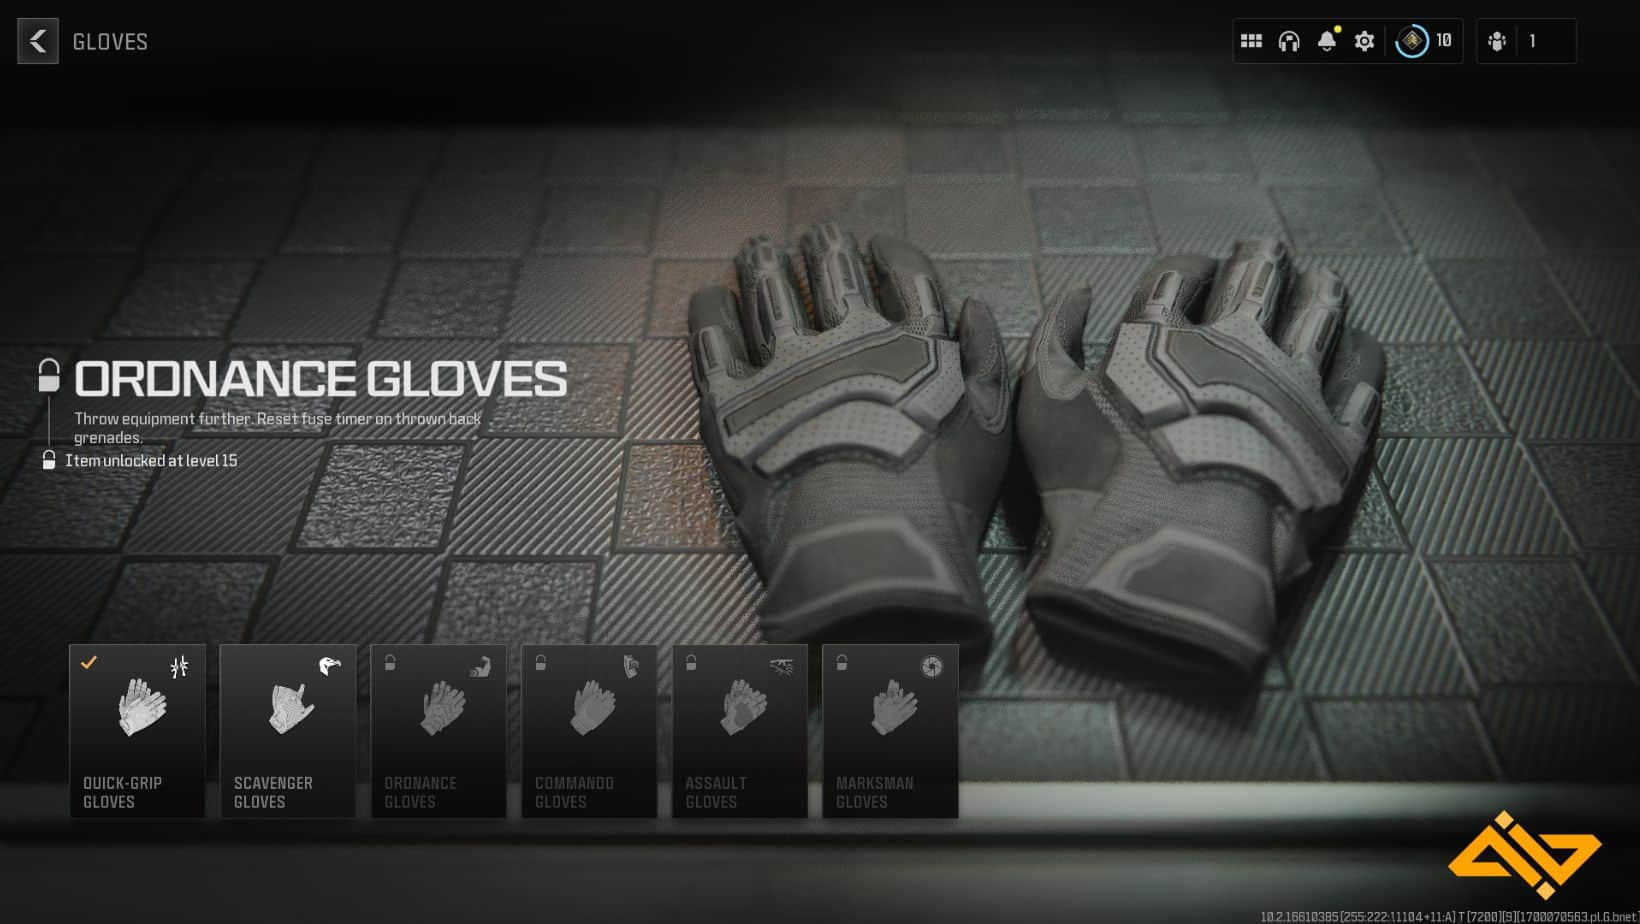 These gloves allow you to throw your grenades and other equipment further than normal.